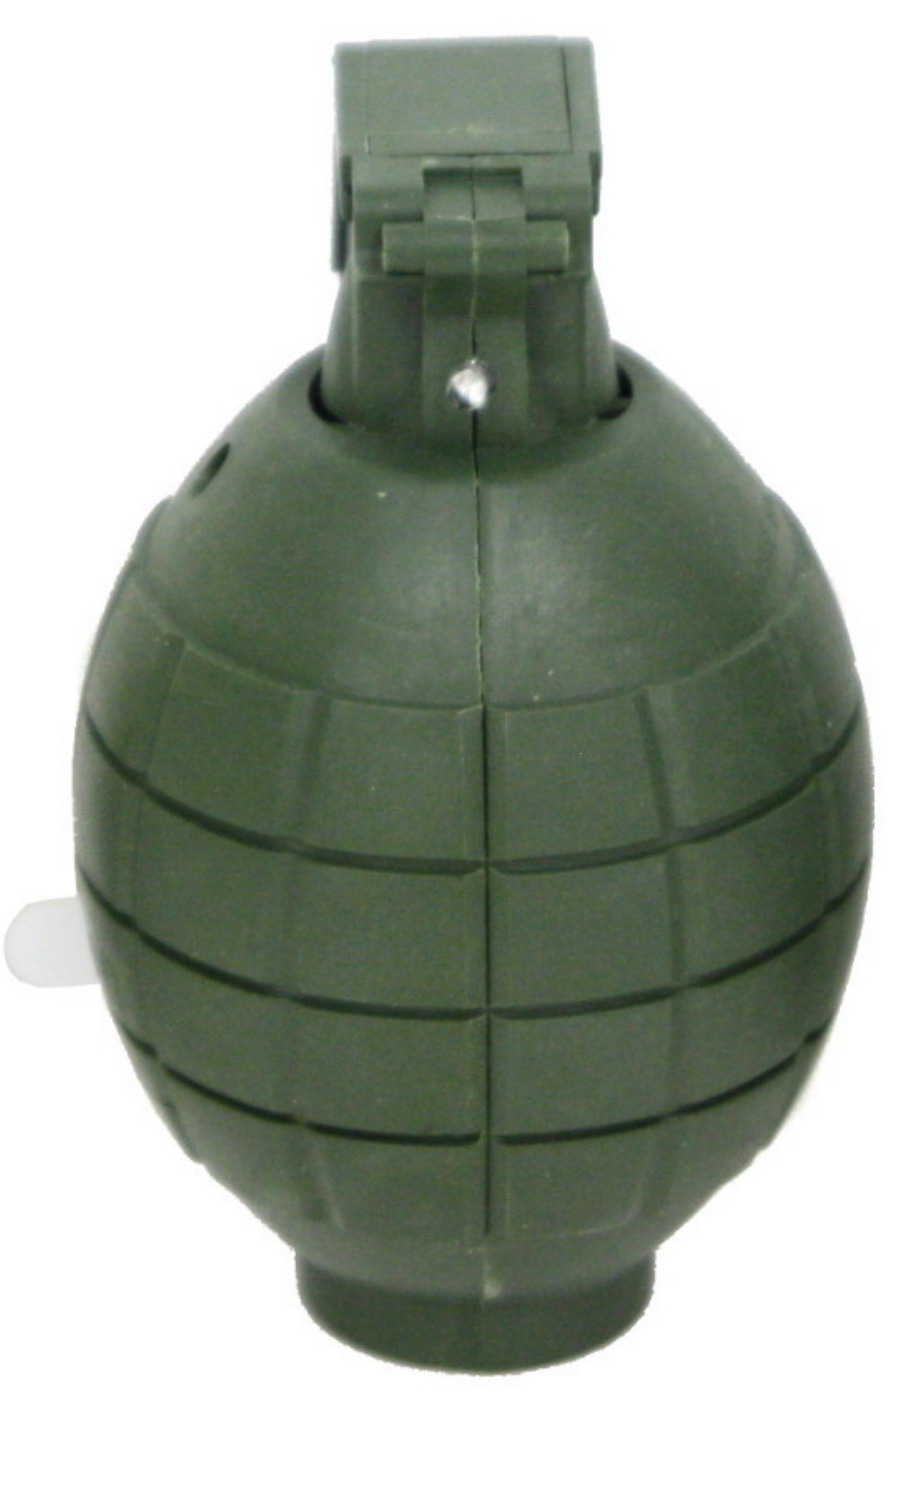 Combat Mission Toy Hand Grenade With Light and Sound